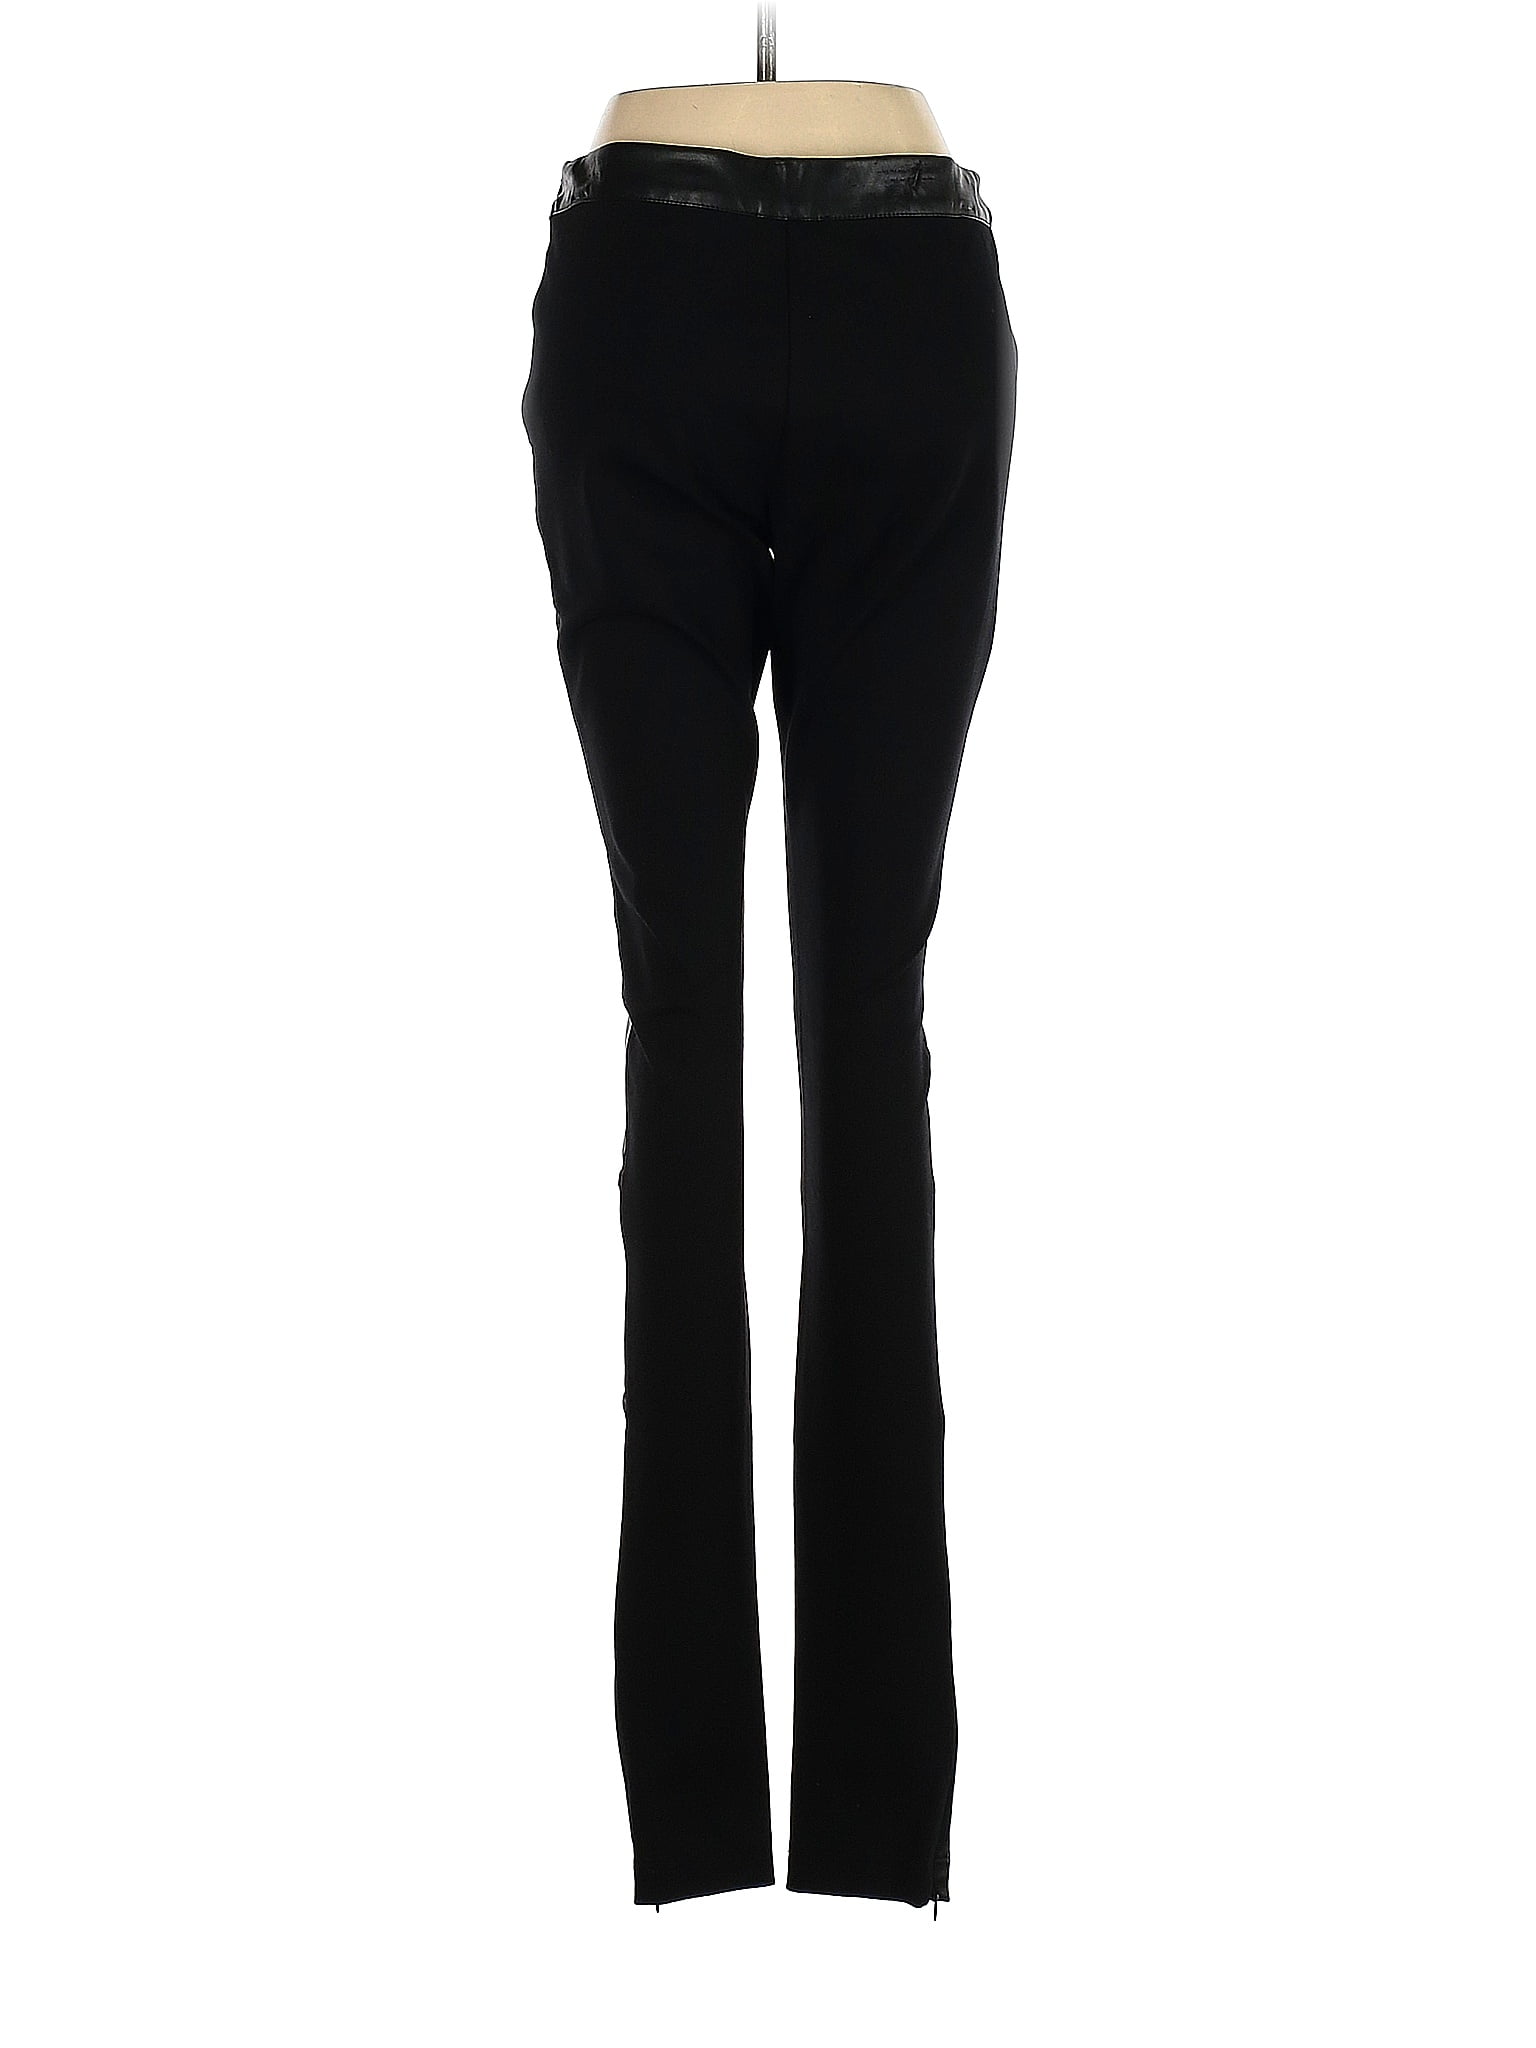 long tall sally, Pants & Jumpsuits, Lts Long Tall Sally Leatherette Faux  Leather Leggings Pants Nwt